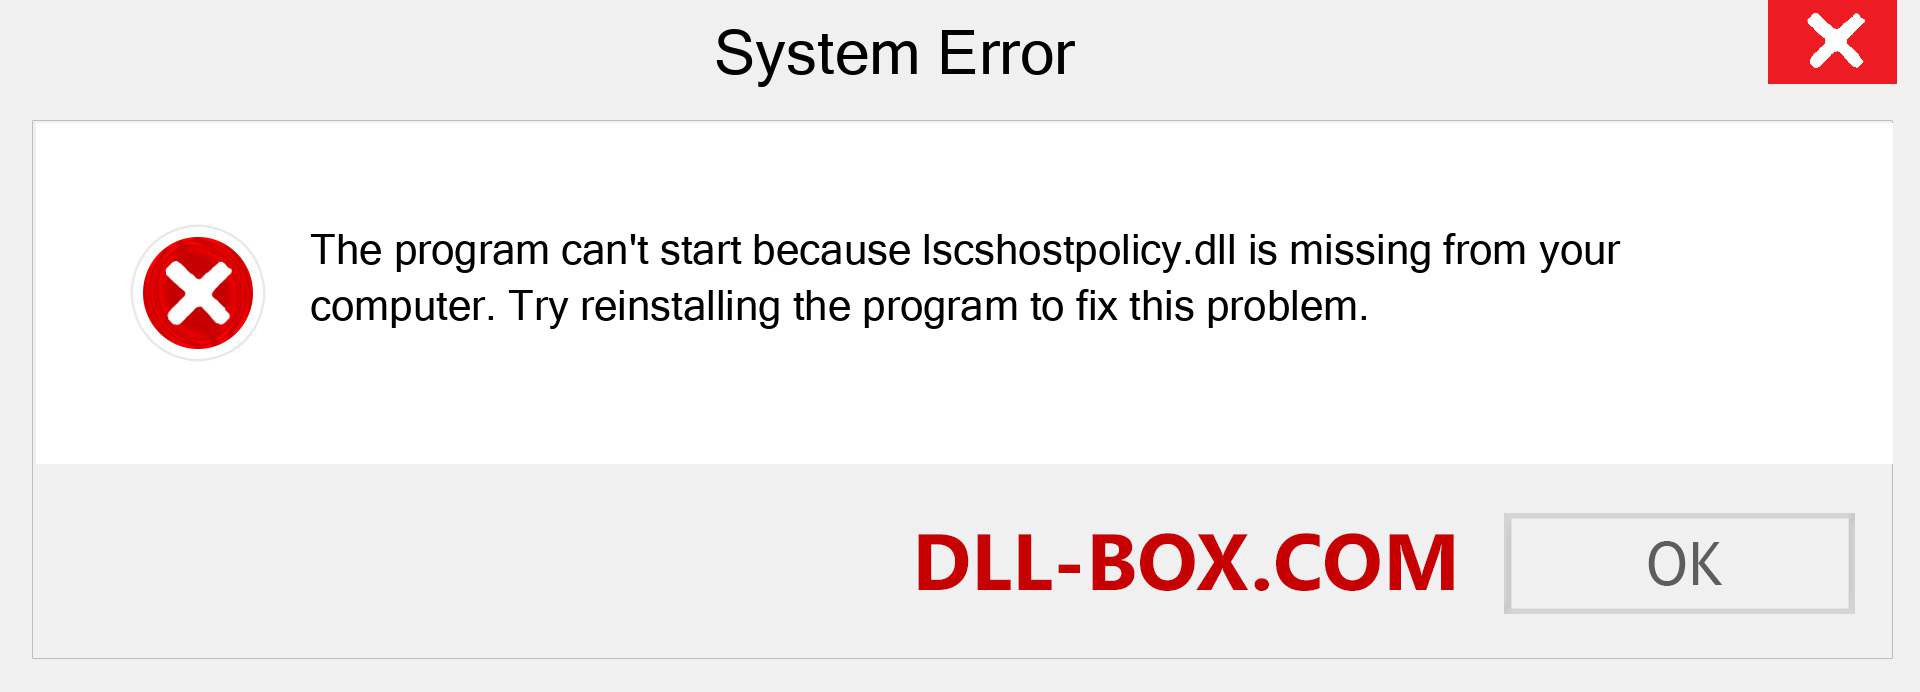  lscshostpolicy.dll file is missing?. Download for Windows 7, 8, 10 - Fix  lscshostpolicy dll Missing Error on Windows, photos, images